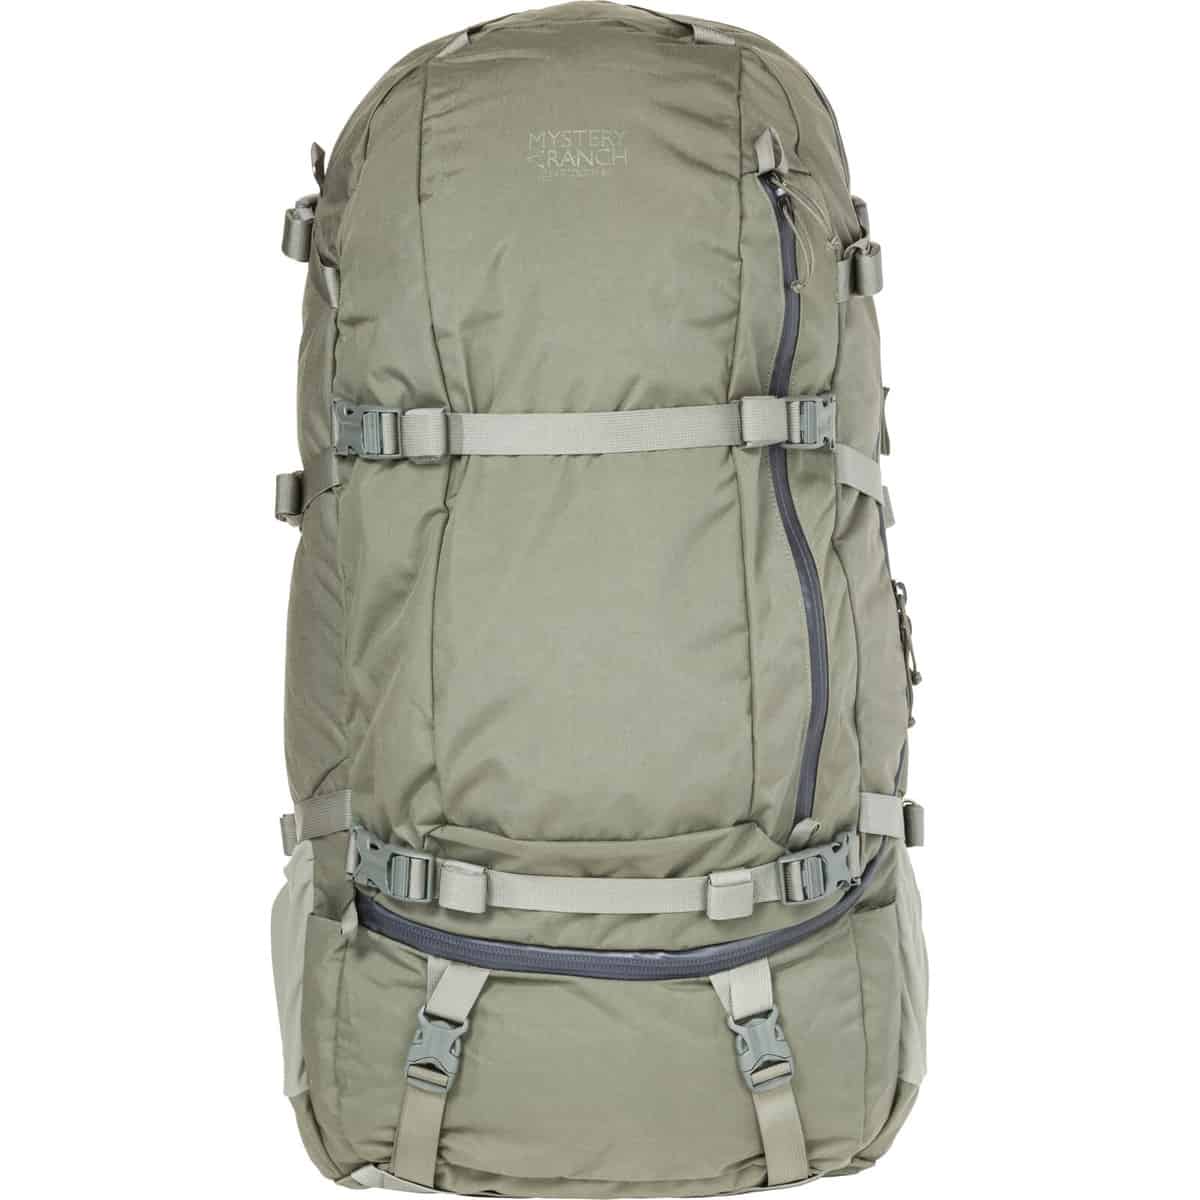 888564177044 Mystery Ranch Beartooth 80 Hunting Backpack Foliage Front